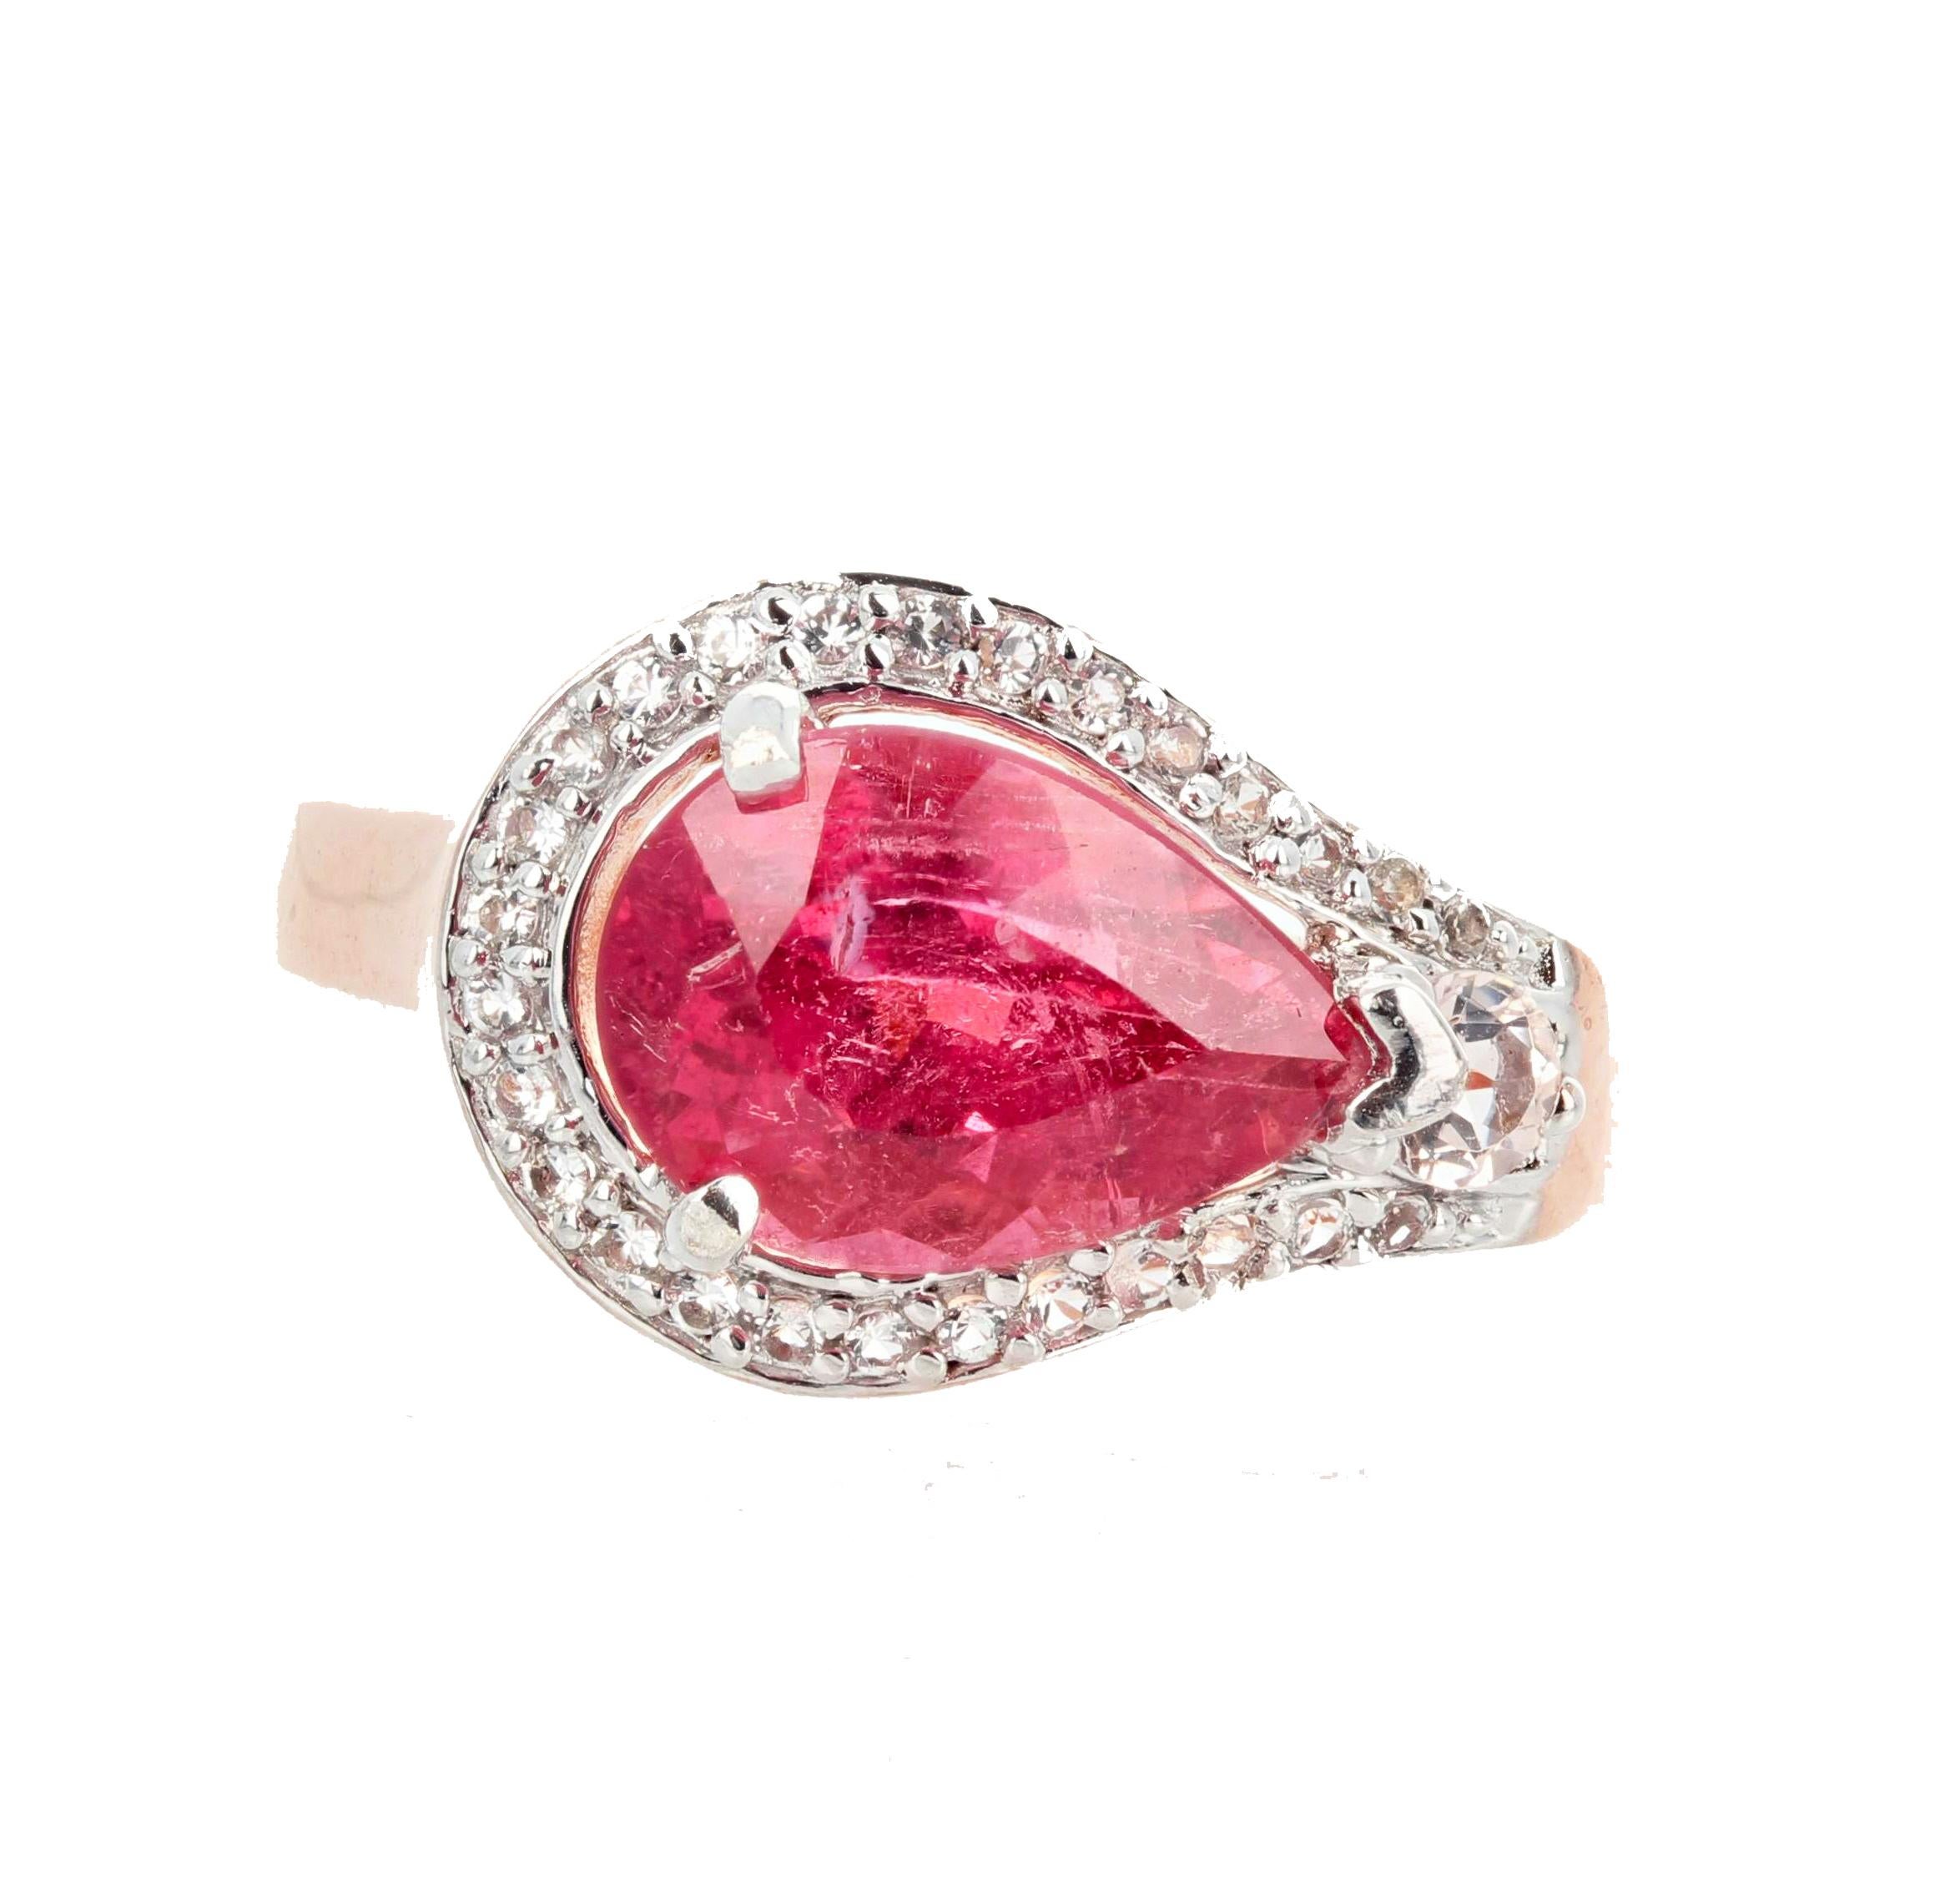 This glittering pear gem cut Pinky Reddish Tourmaline is set in a rose gold plated sterling silver ring size 7 (sizable) and is enhanced with tiny little white diamonds.  This goes happily to dinner or parties.  